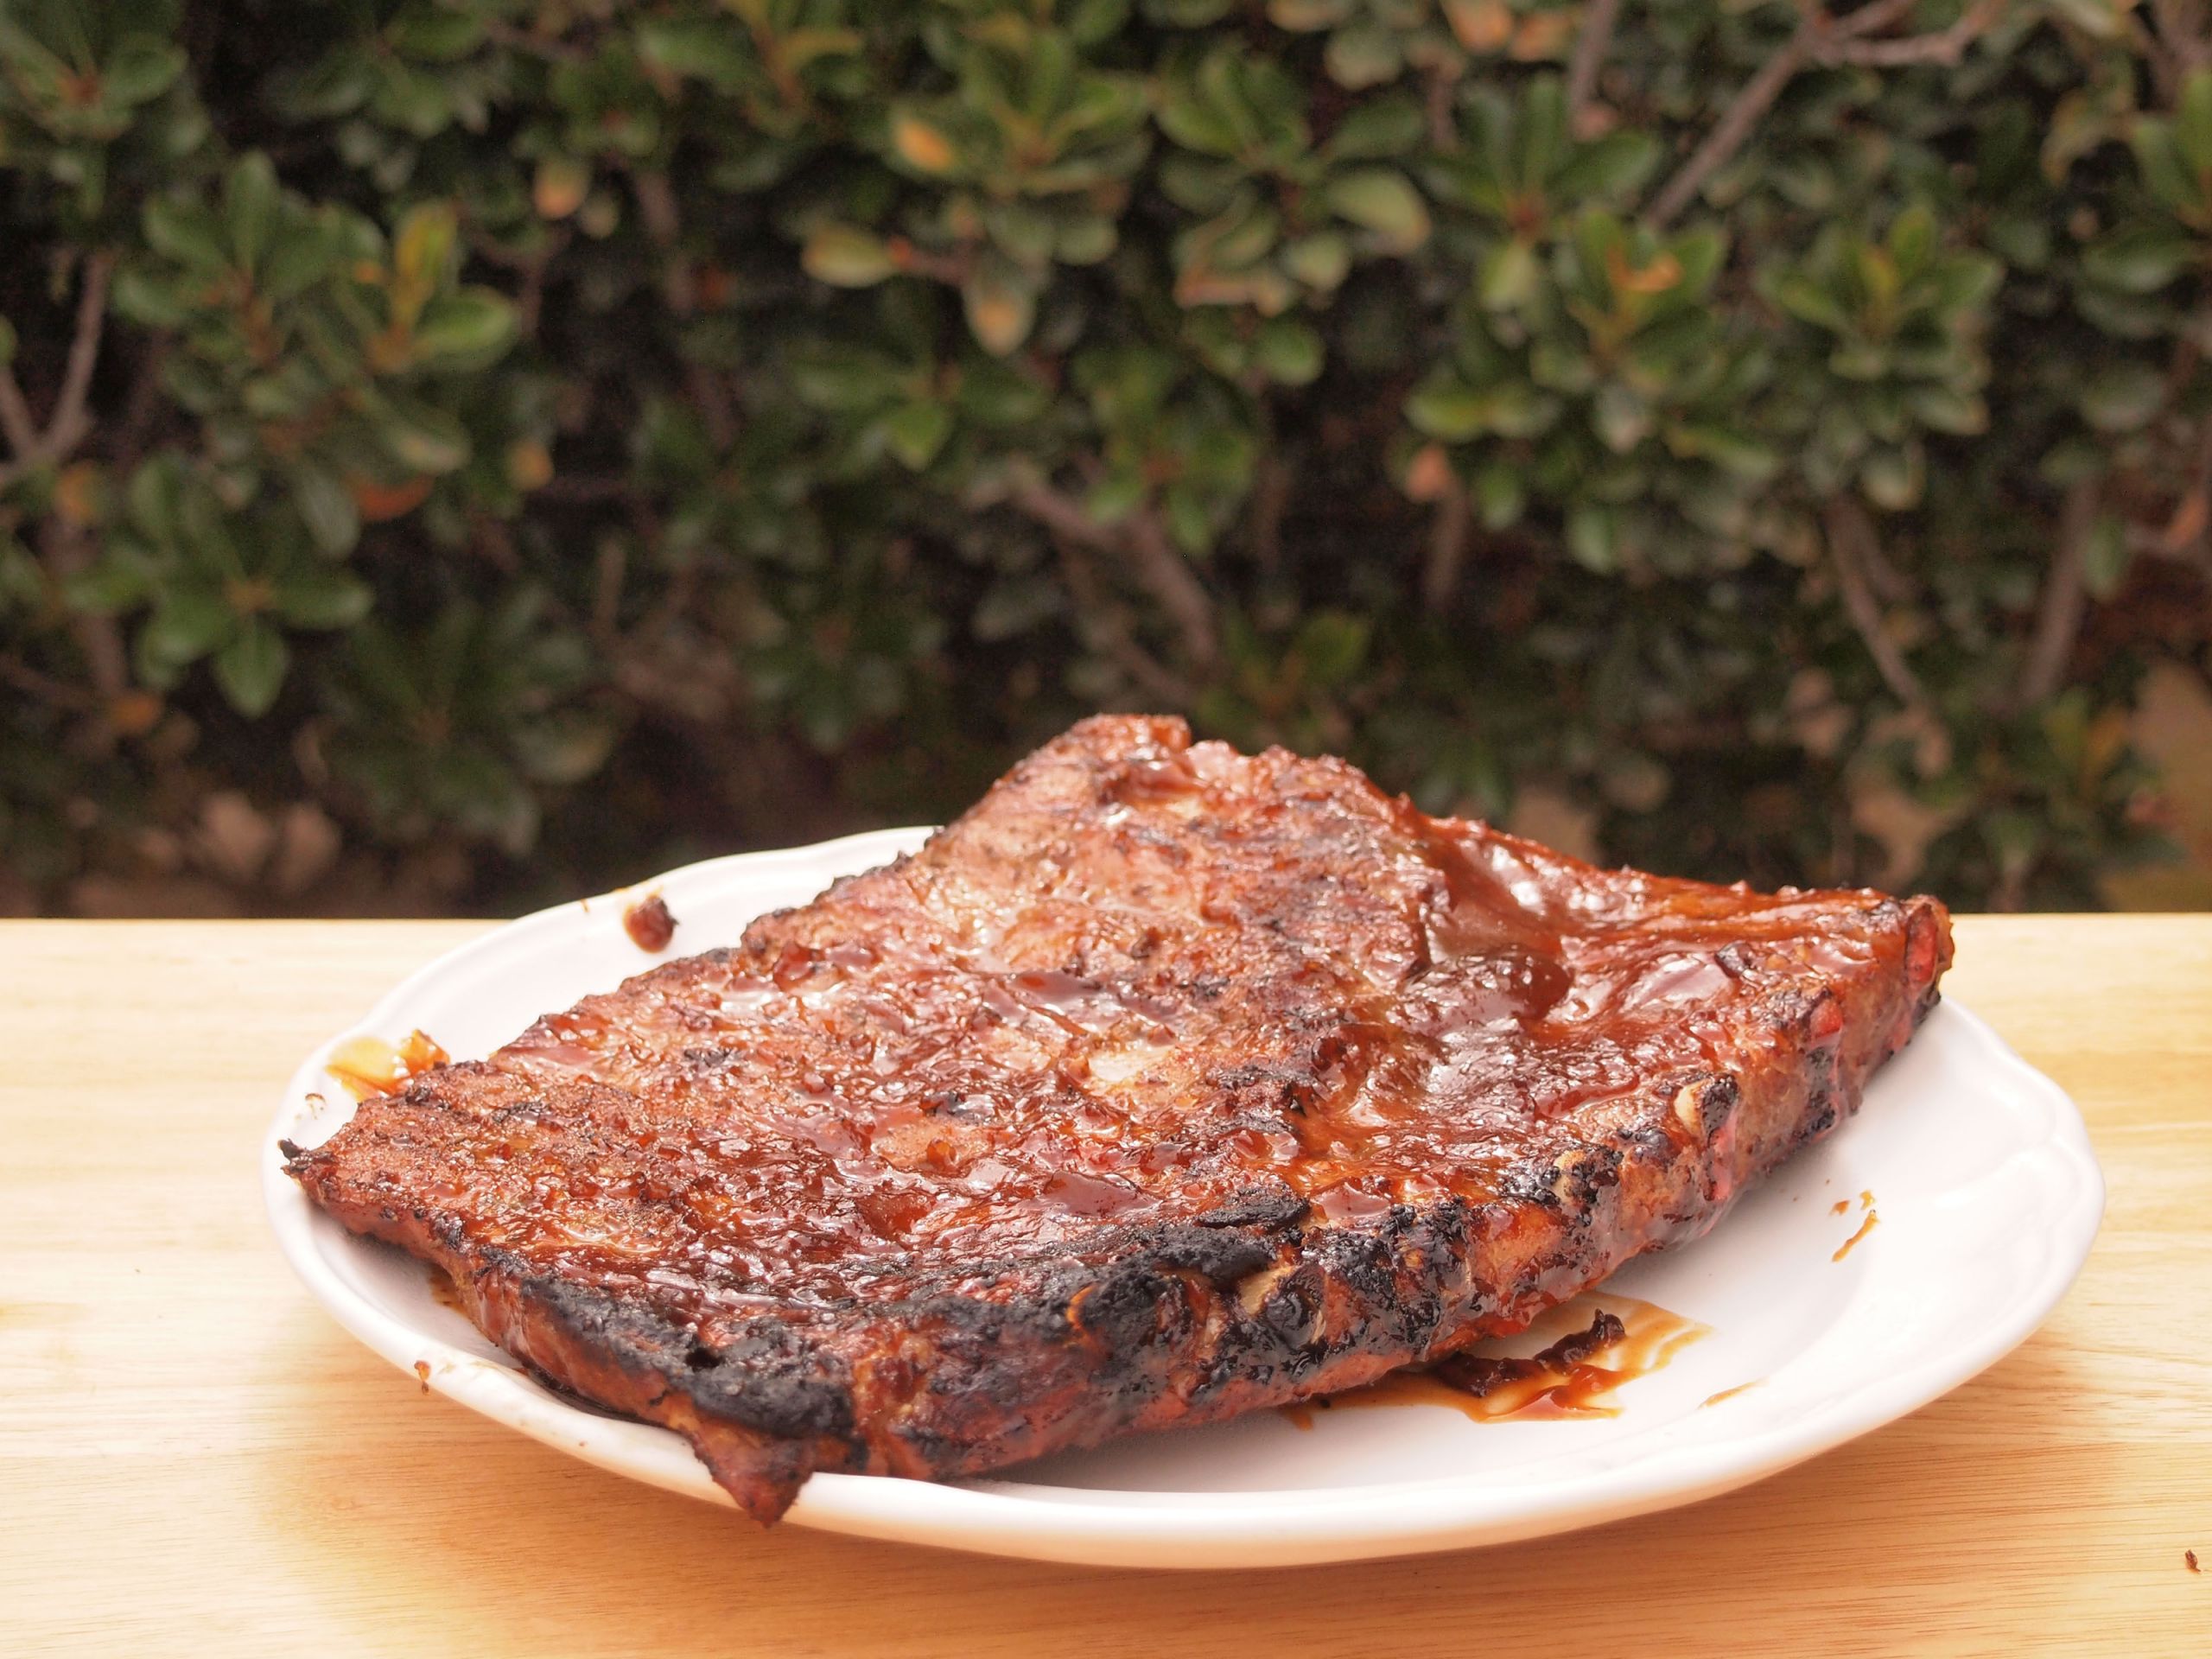 Fall Off The Bone Beef Ribs
 30 Ideas for Fall f the Bone Beef Ribs Best Diet and